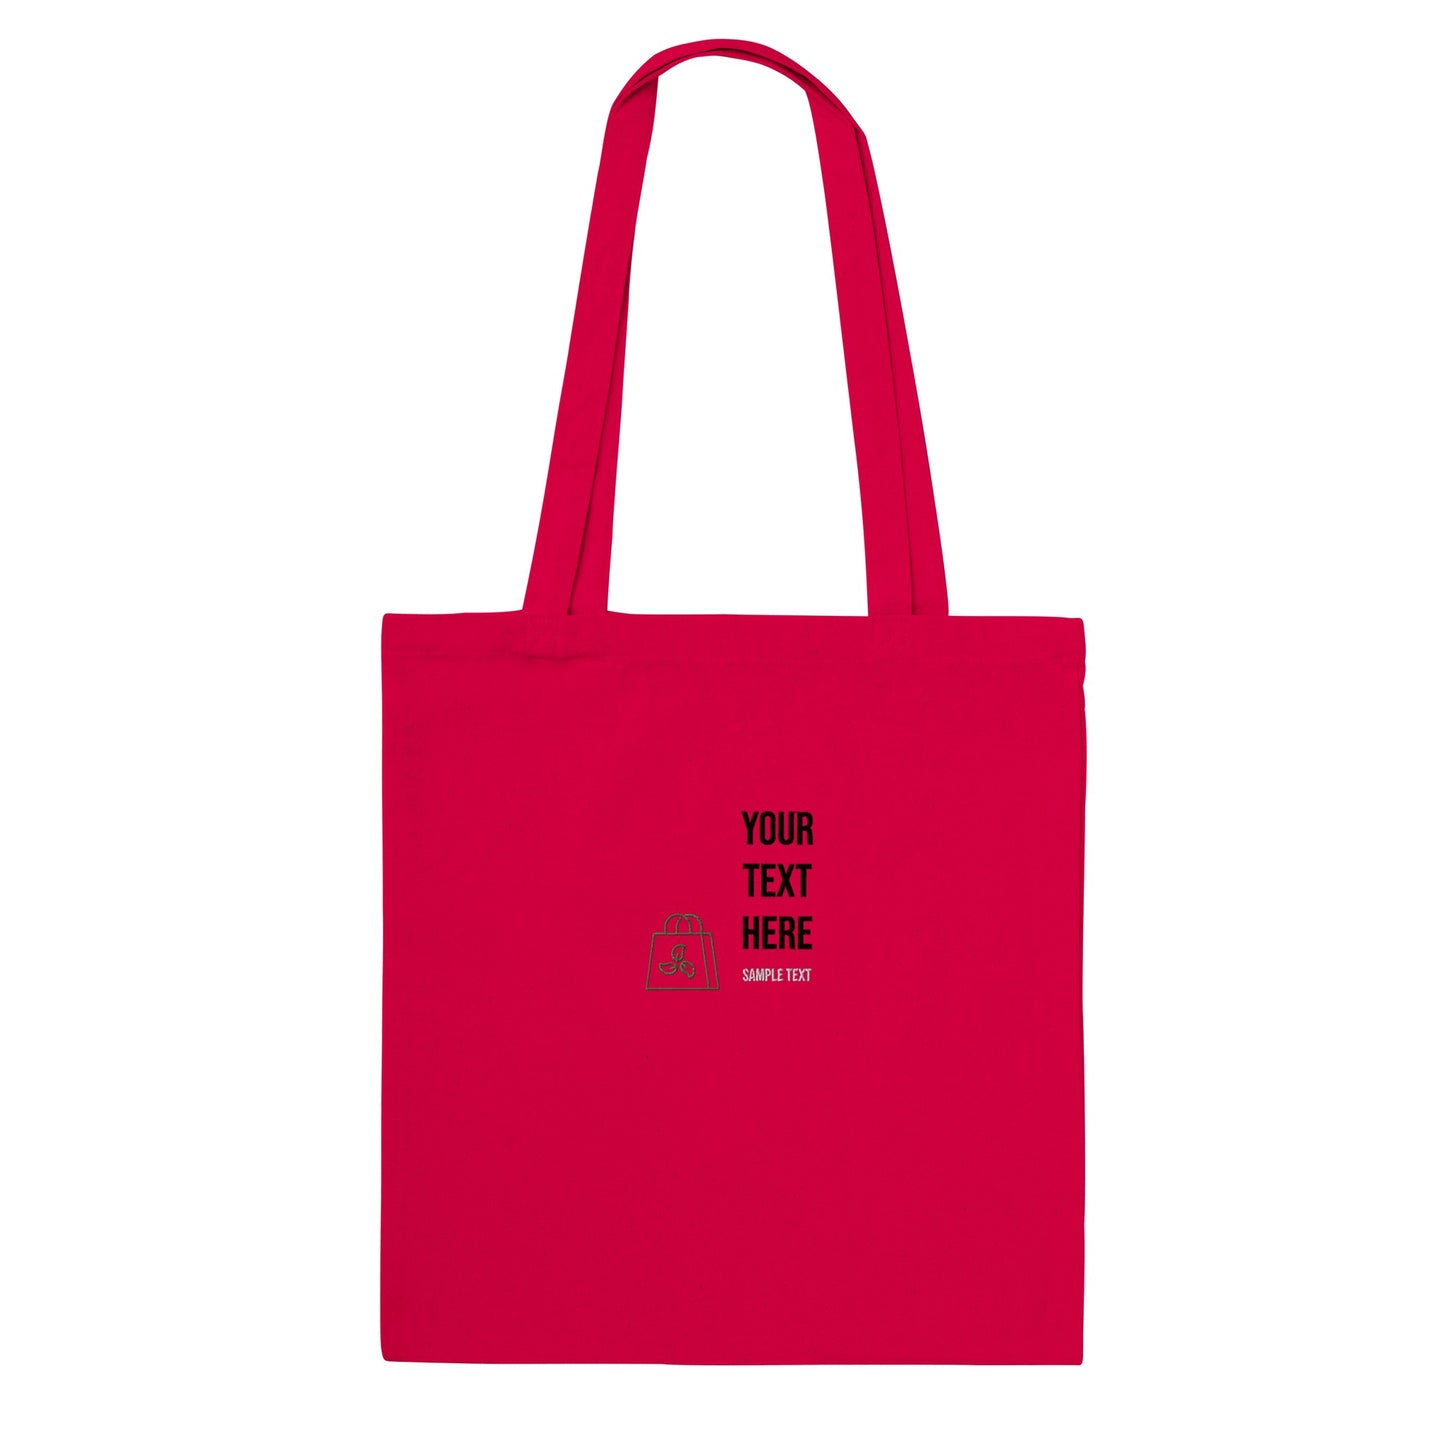 Personalised Tote Bag - Design Your Own